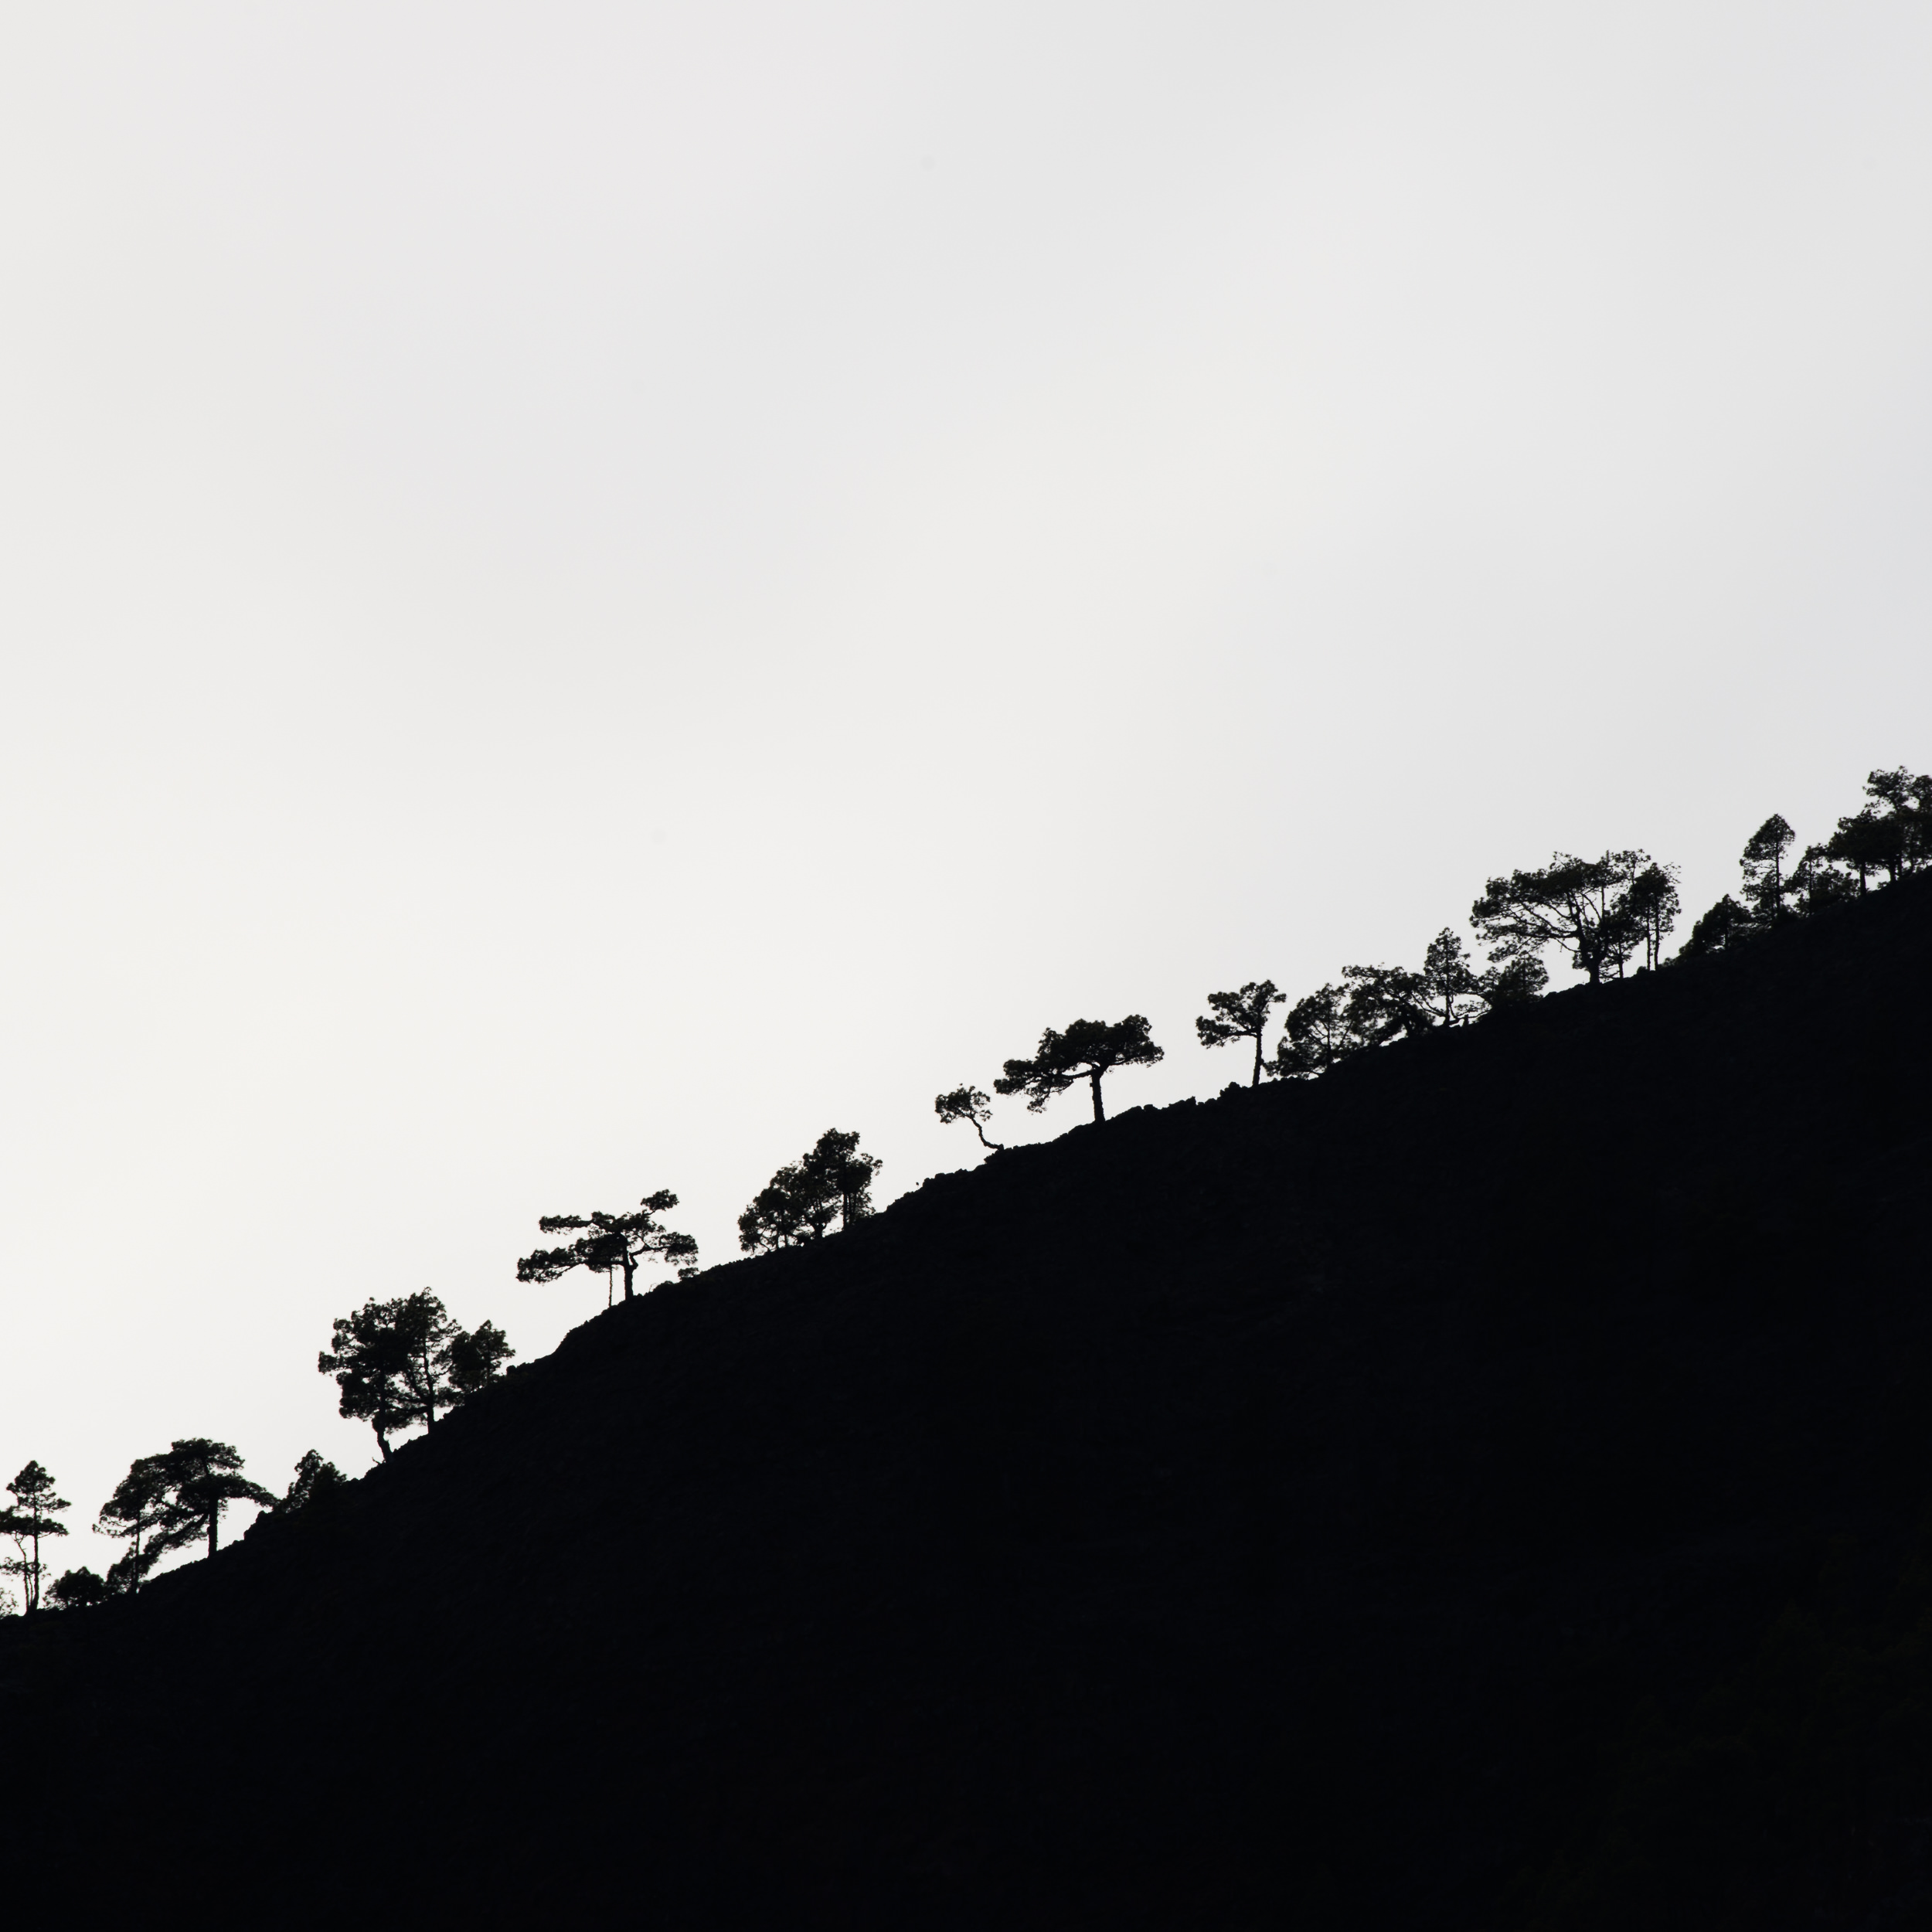 Mysterious and graphical representation of minimalism in the forest - La Palma island , Rafael Rojas.jpg